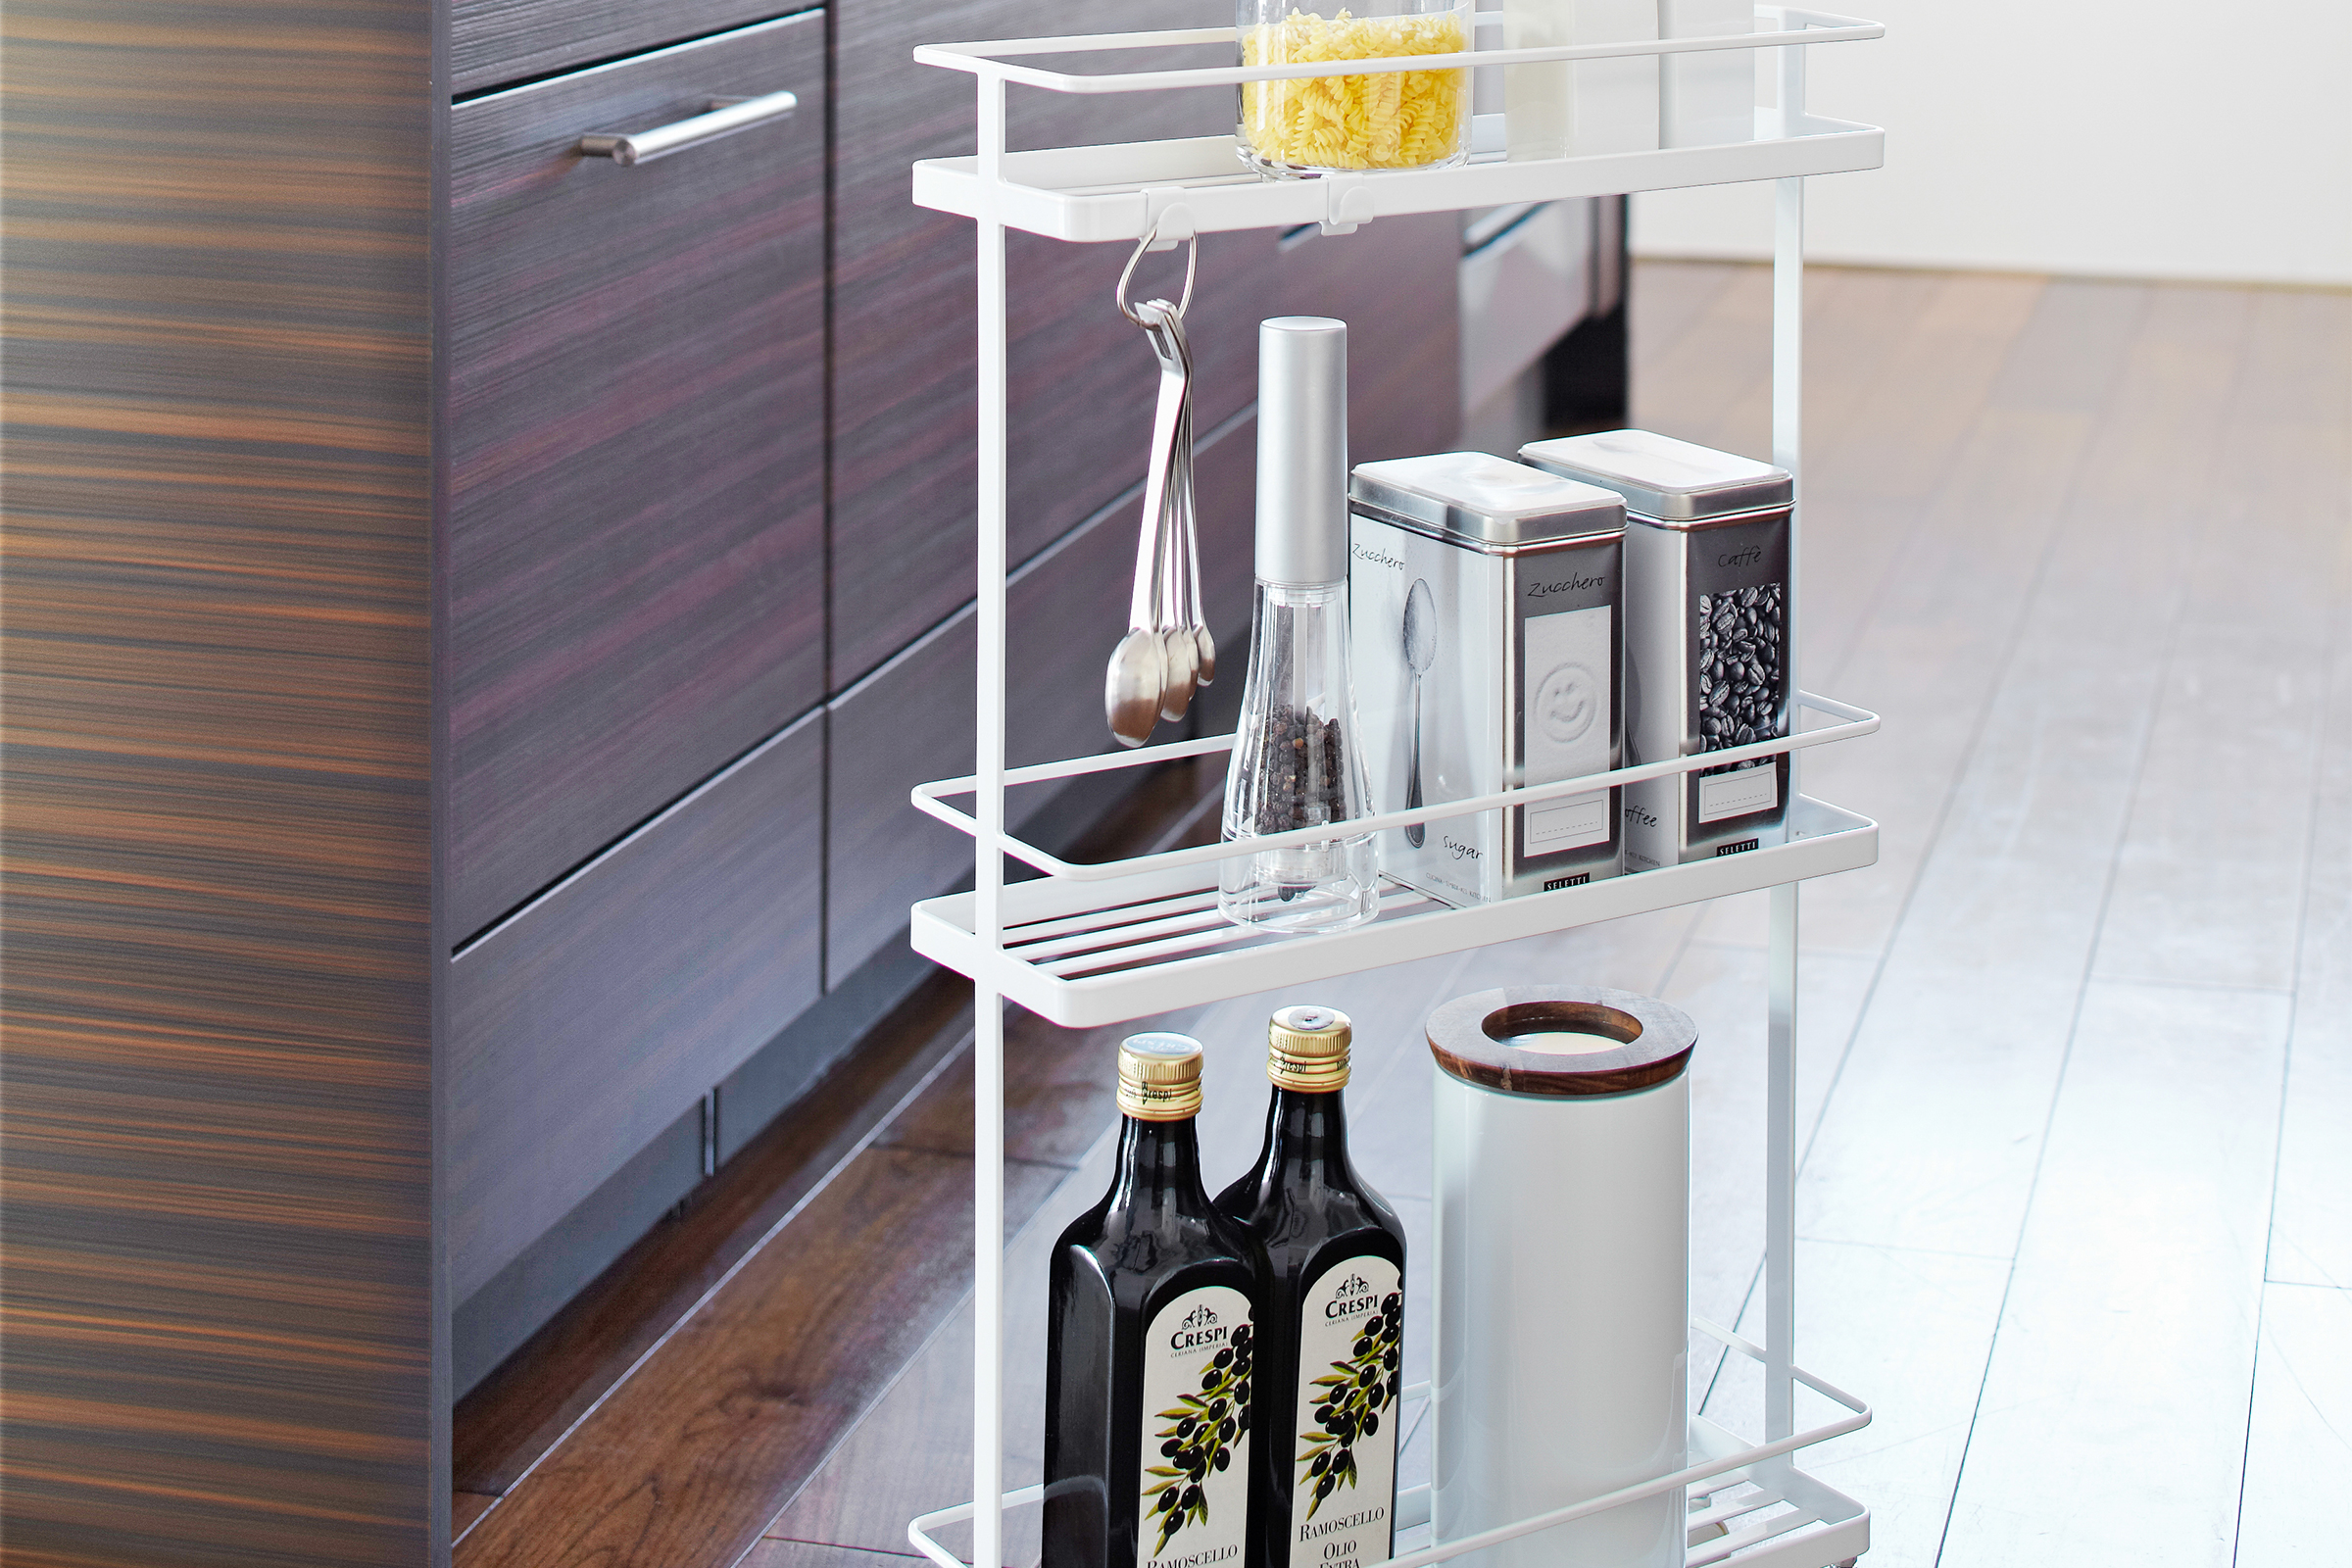 Front view of Yamazaki Home white Rolling Cart holding spices, oils, and cooking accessories in kitchen.